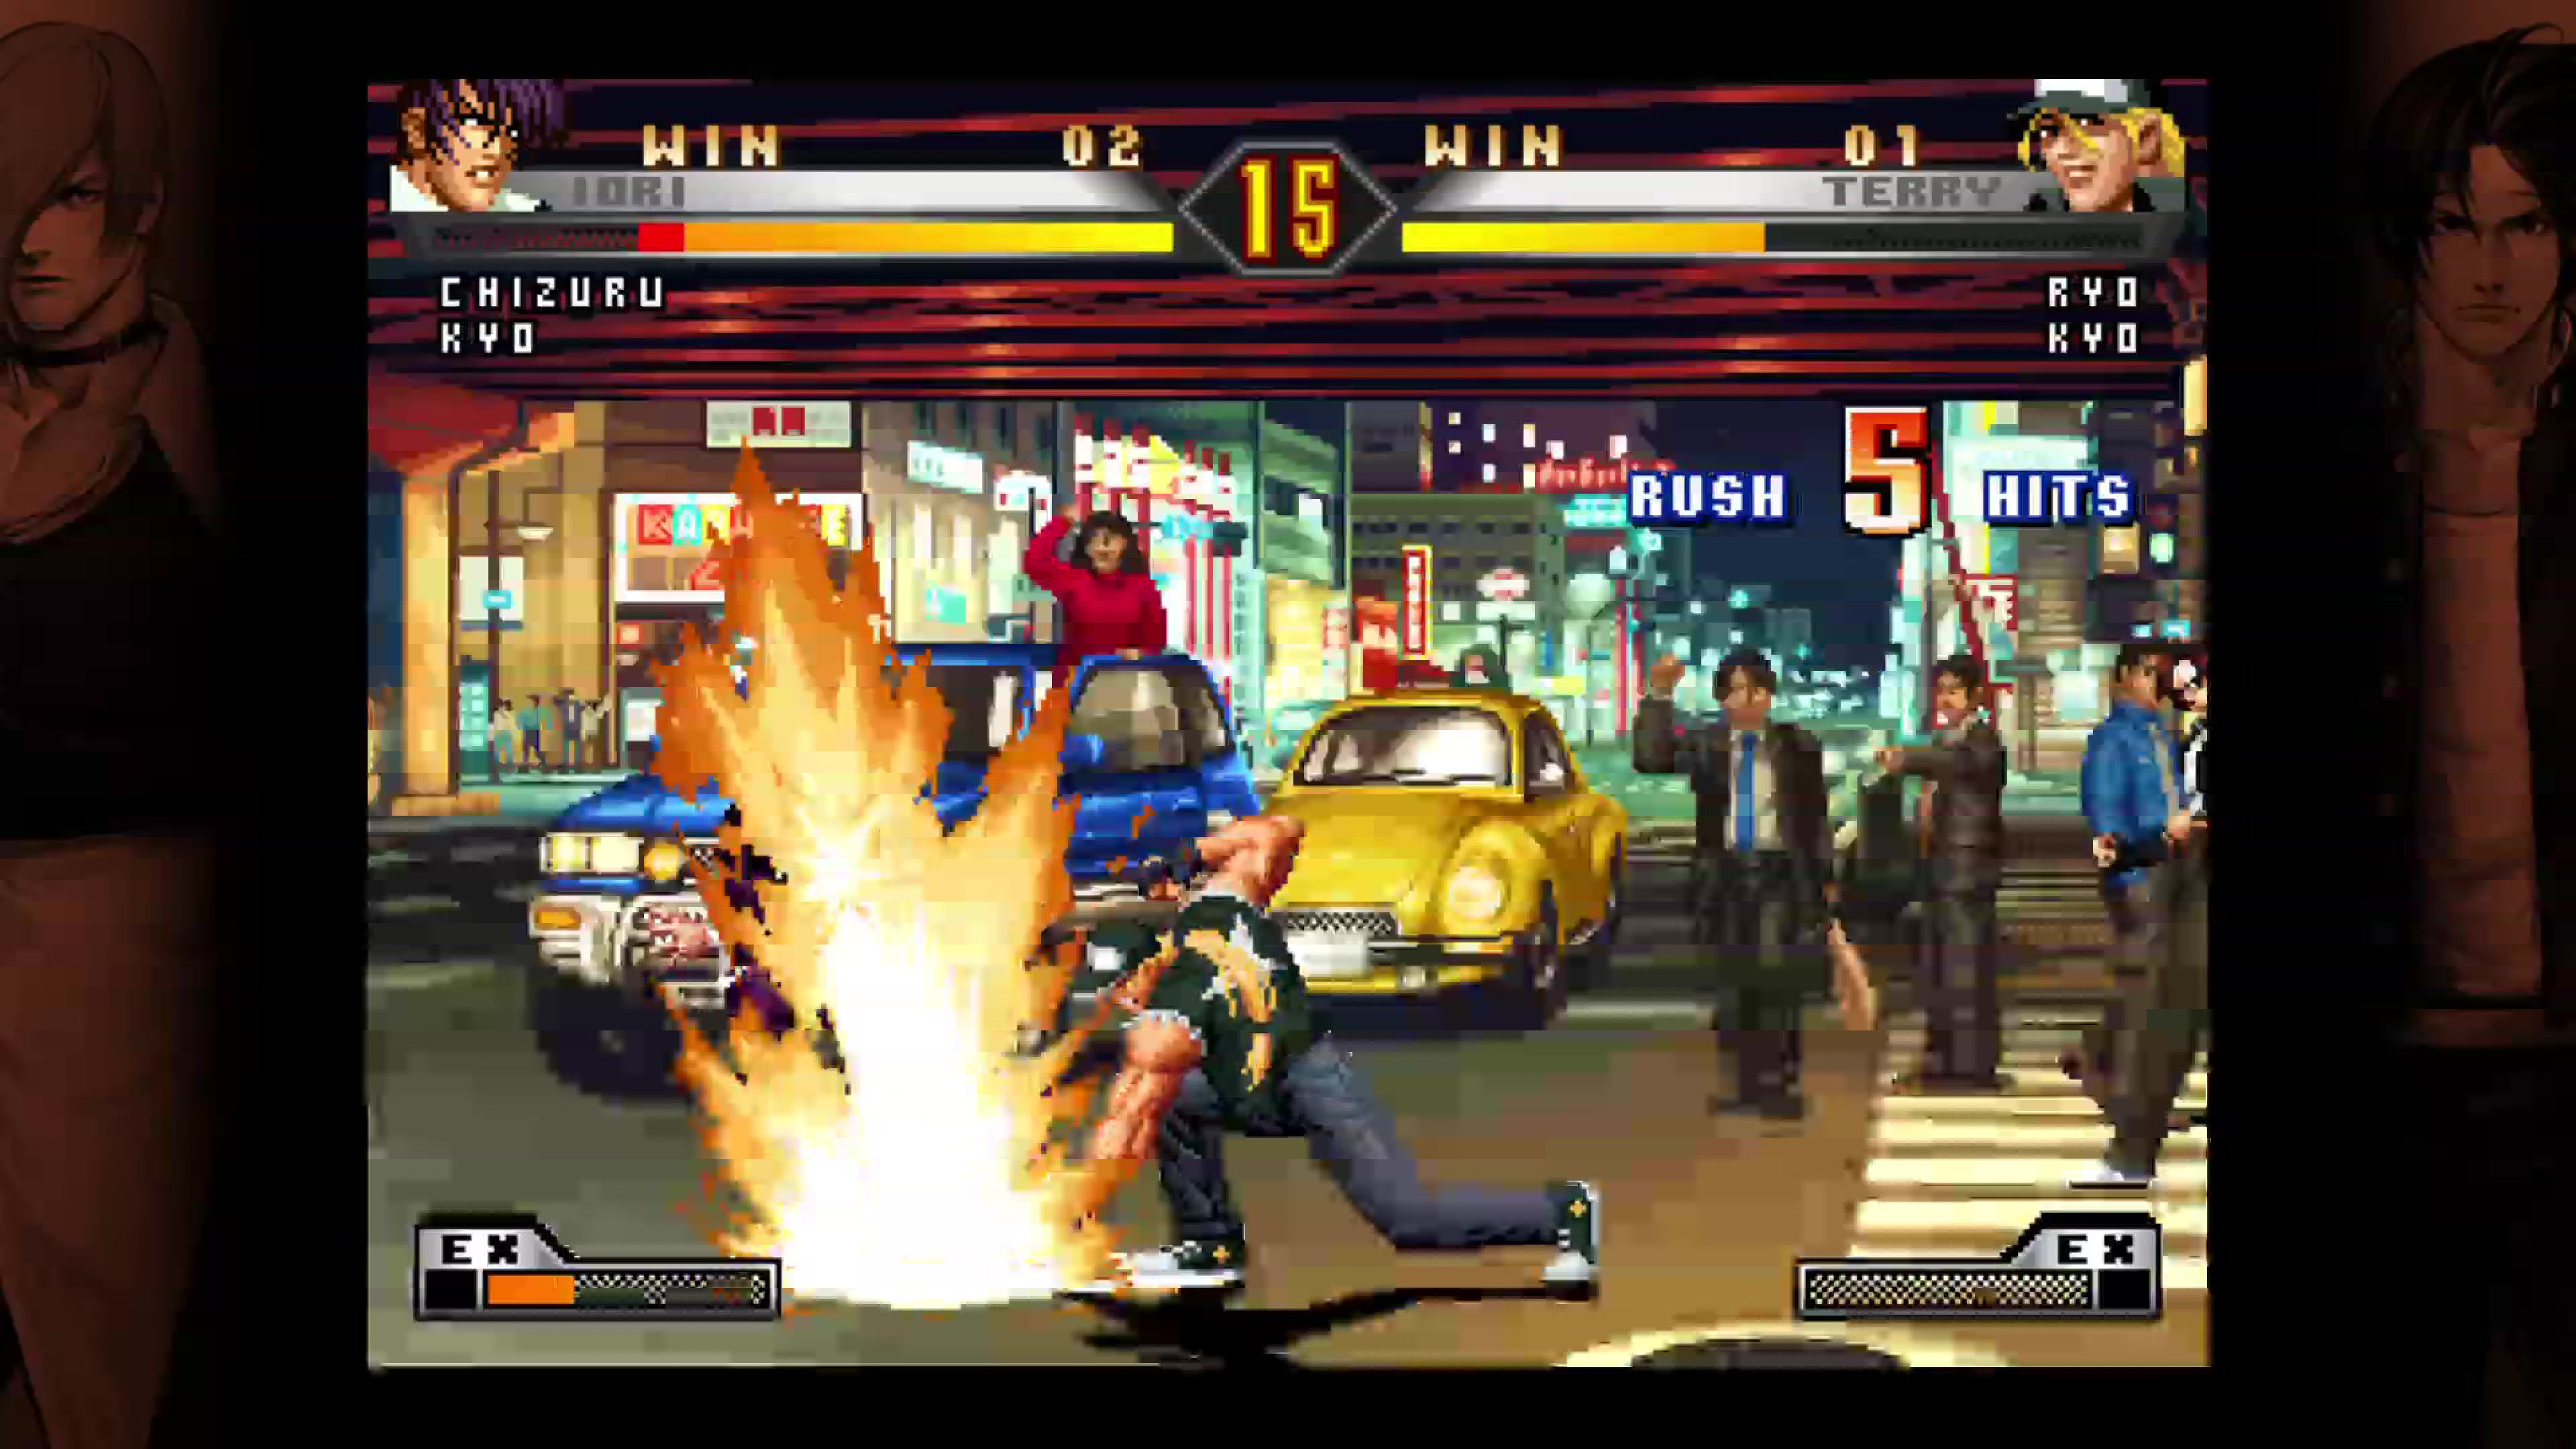 The King of Fighters '98 Ultimate Match ROM & ISO - PS2 Game